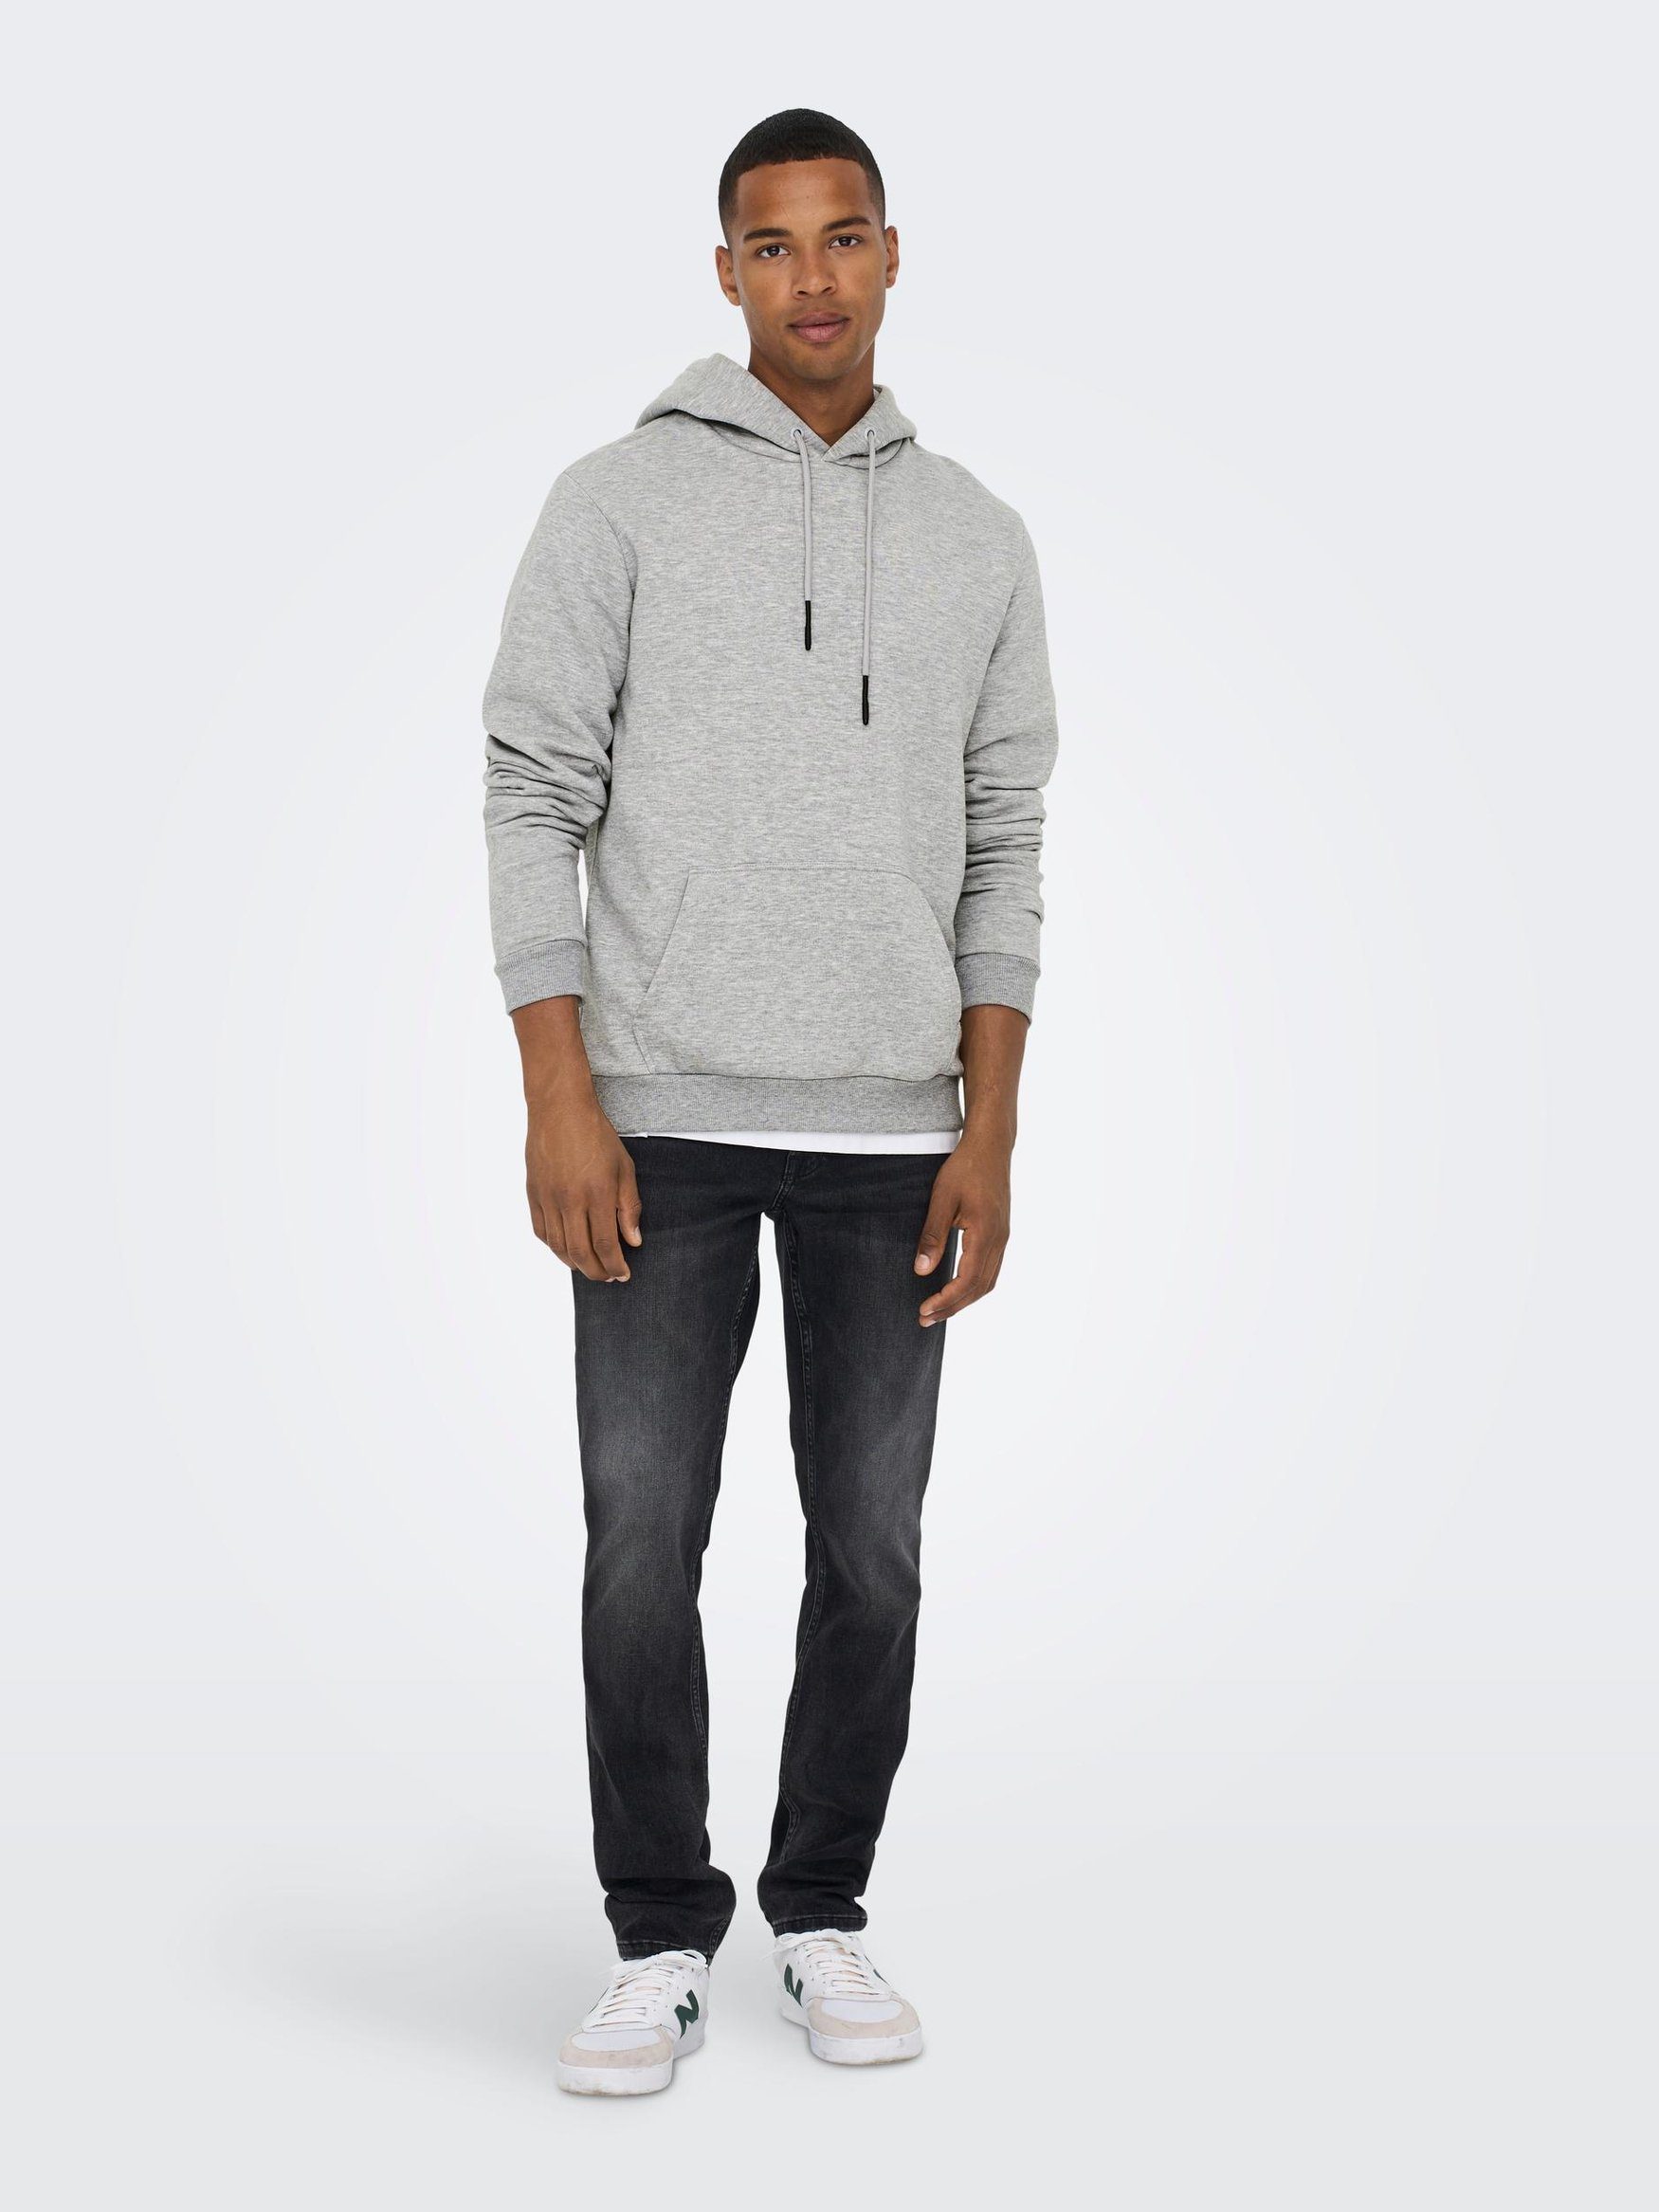 ONLY Hoodie Grau-2 in 5425 & Kapuzen SONS Pullover Basic Hoodie Weicher ONSCERES